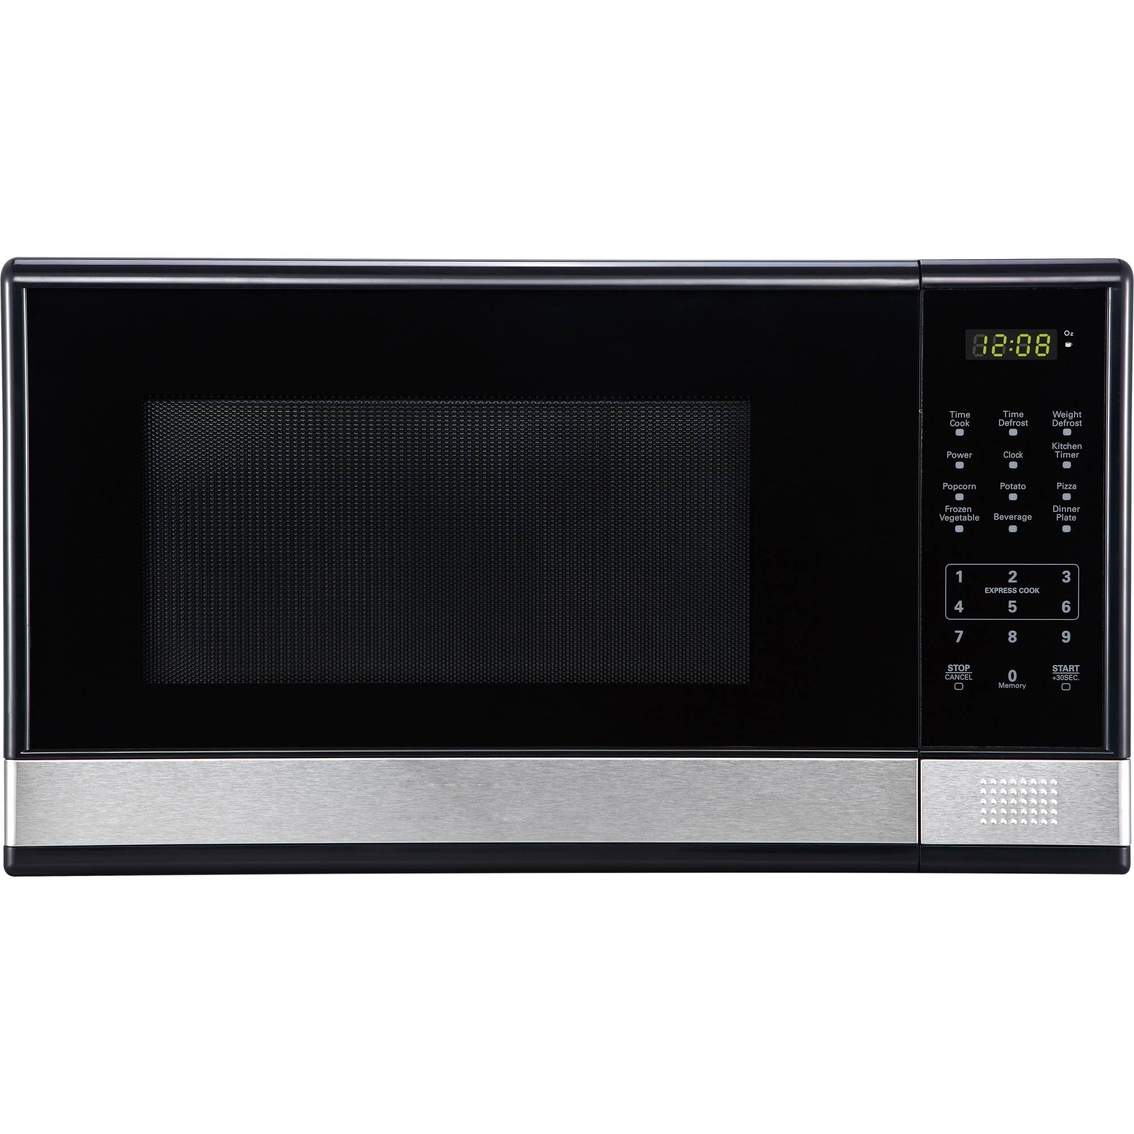 Military/Veterans: %20 off Simply Perfect 1.1cf Microwave Oven Stainless Steel ($59.96)